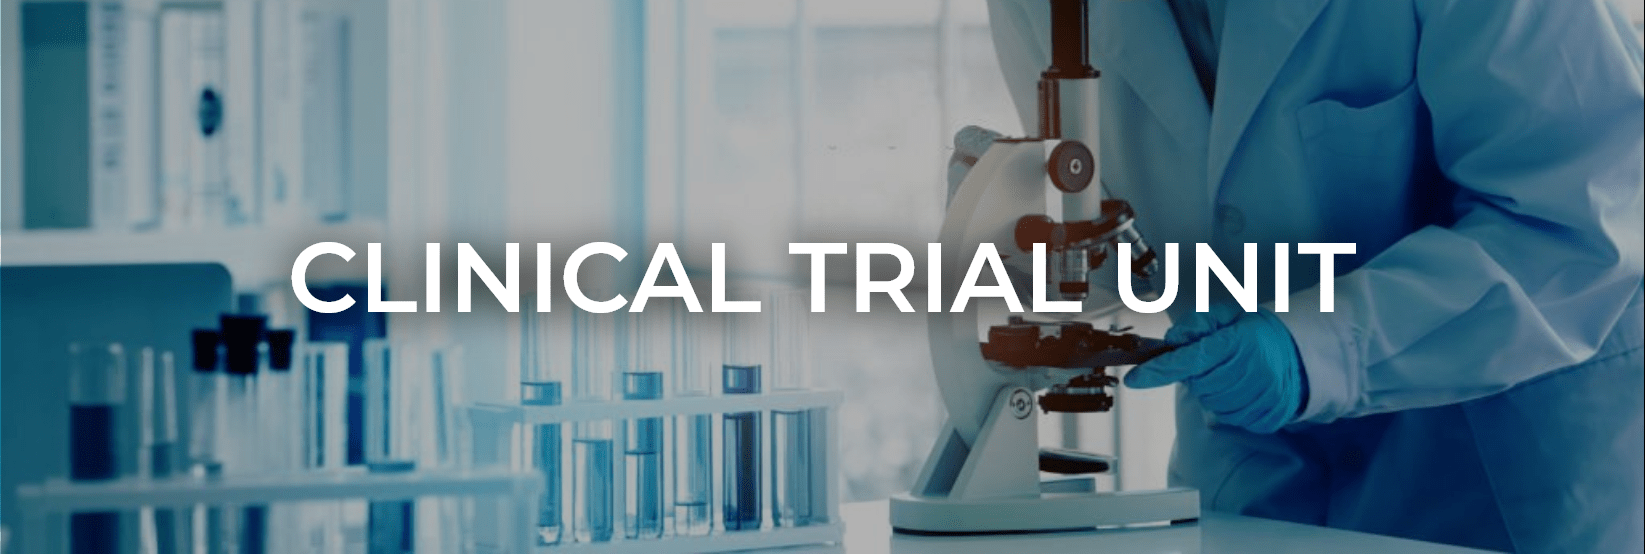 Clinical trial unit